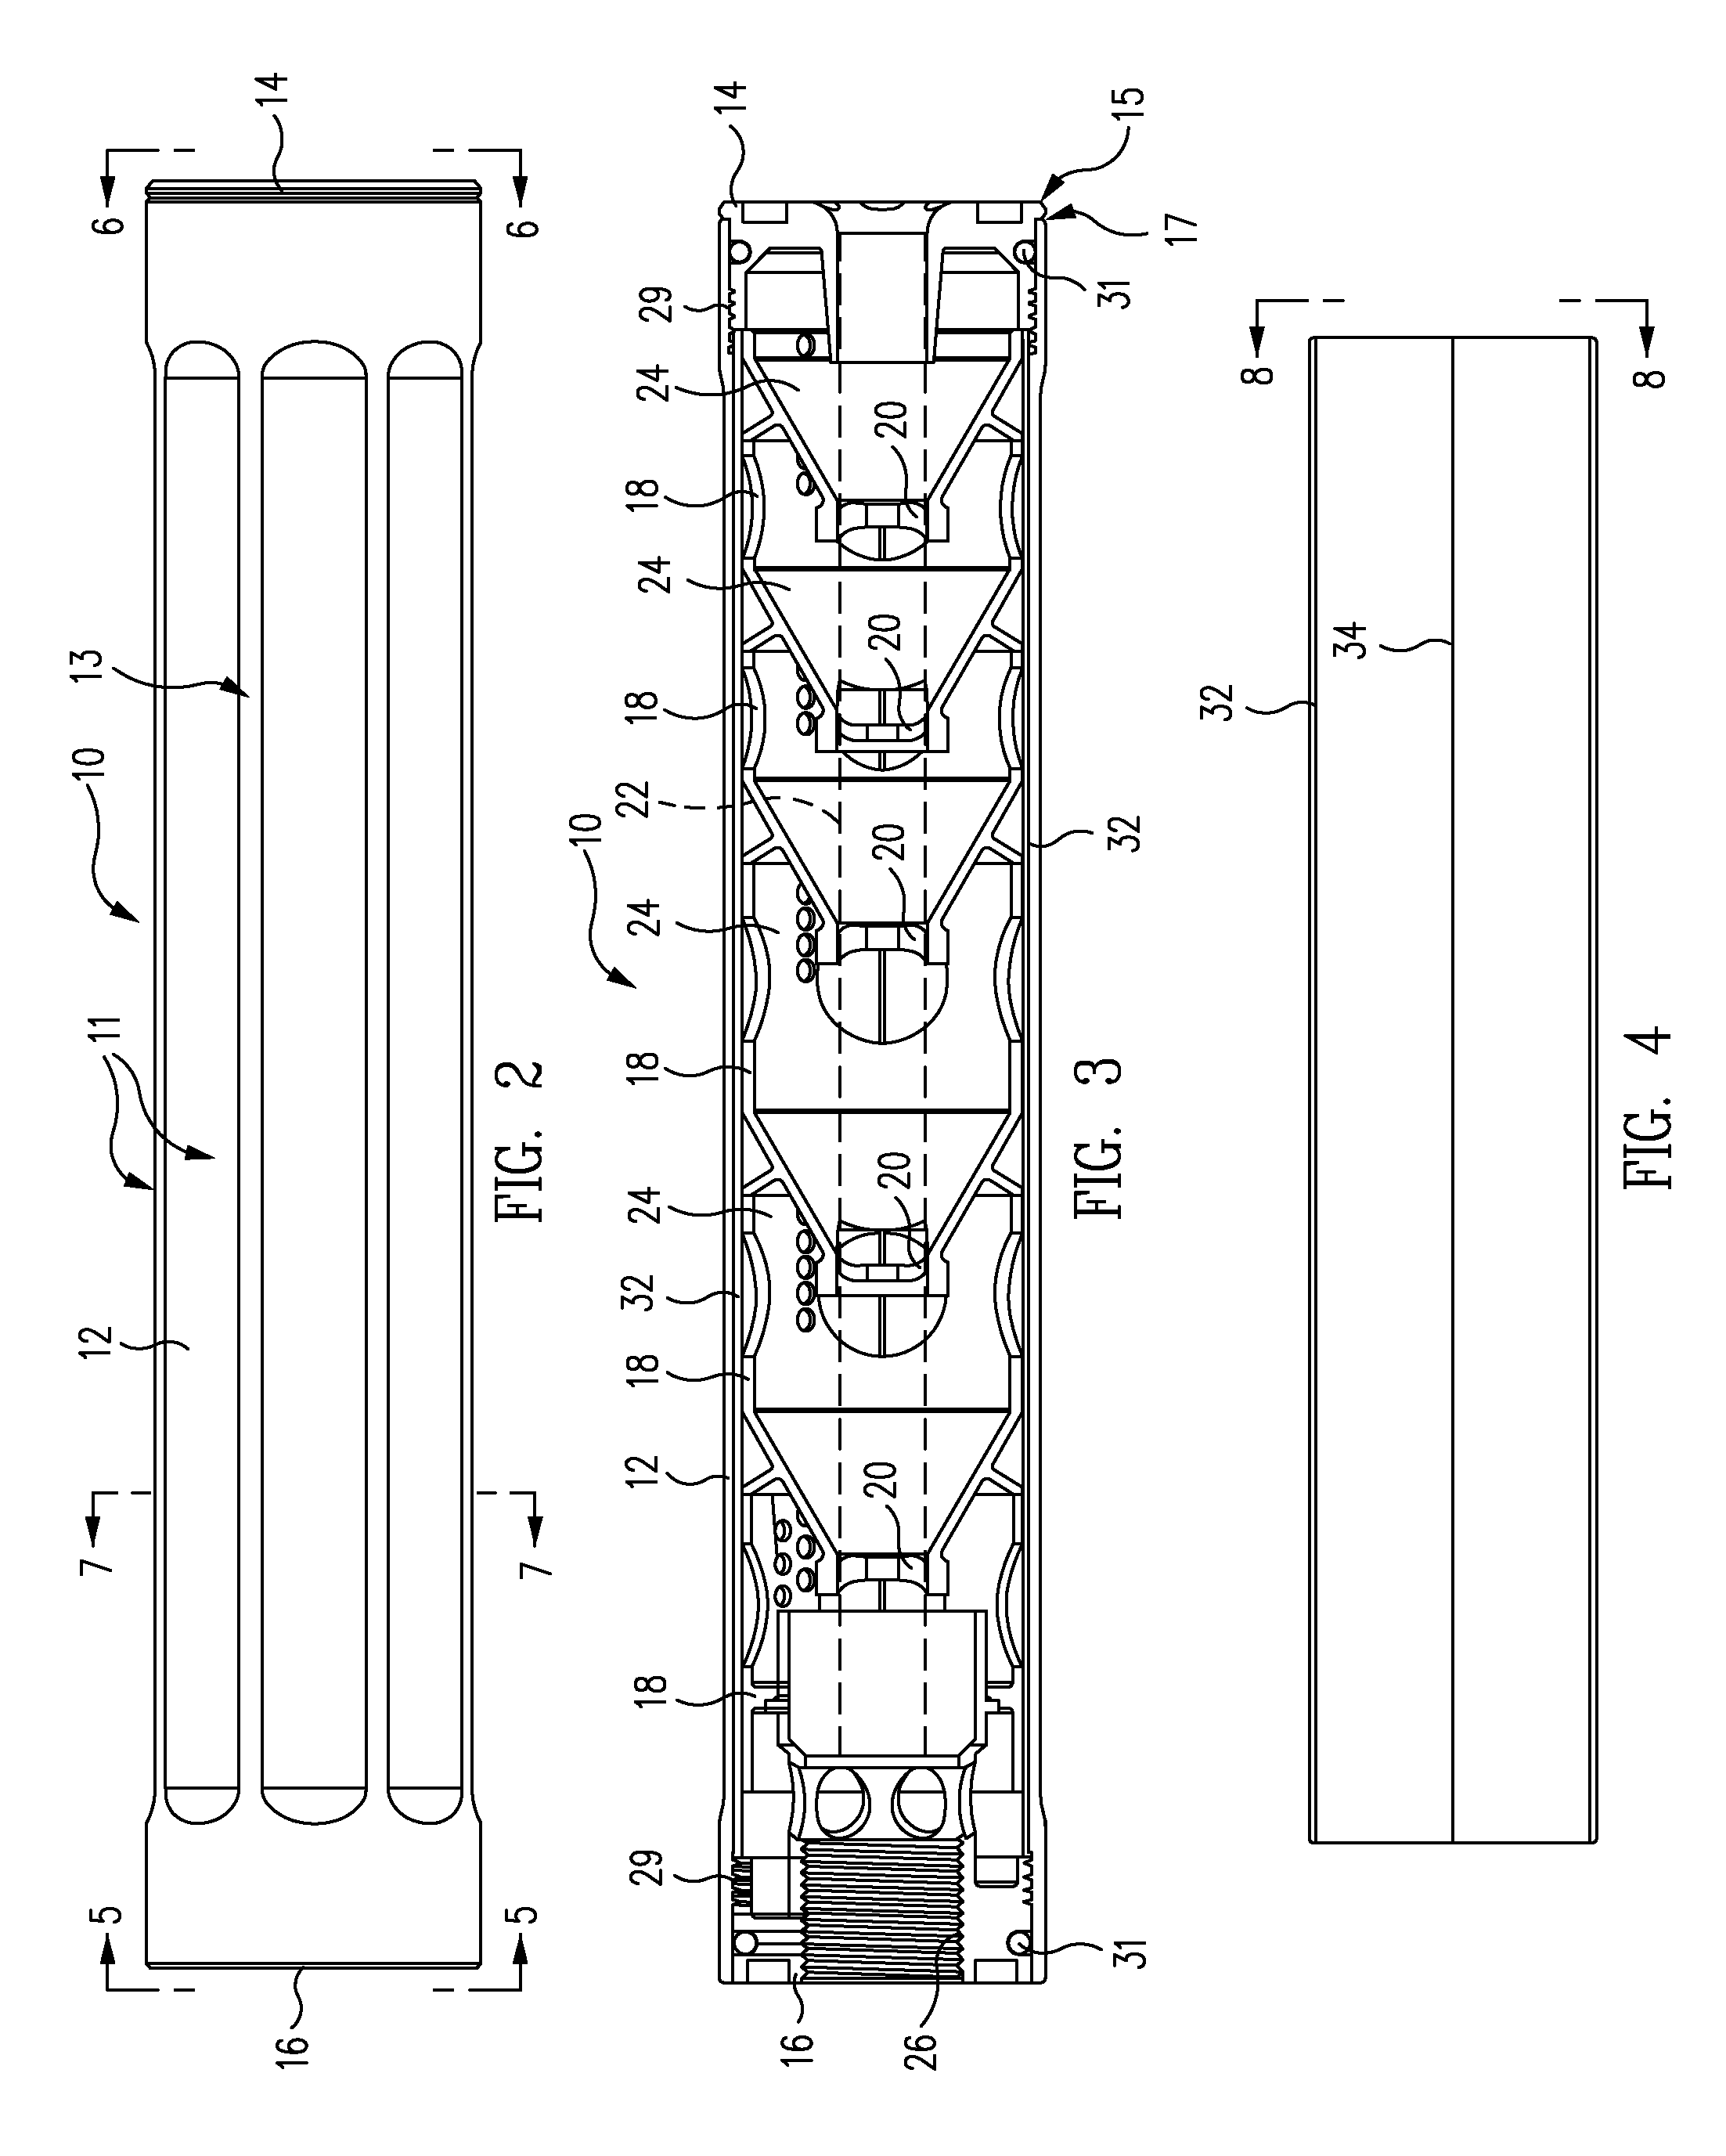 Firearm sound suppressor with front plate having a tapered bore